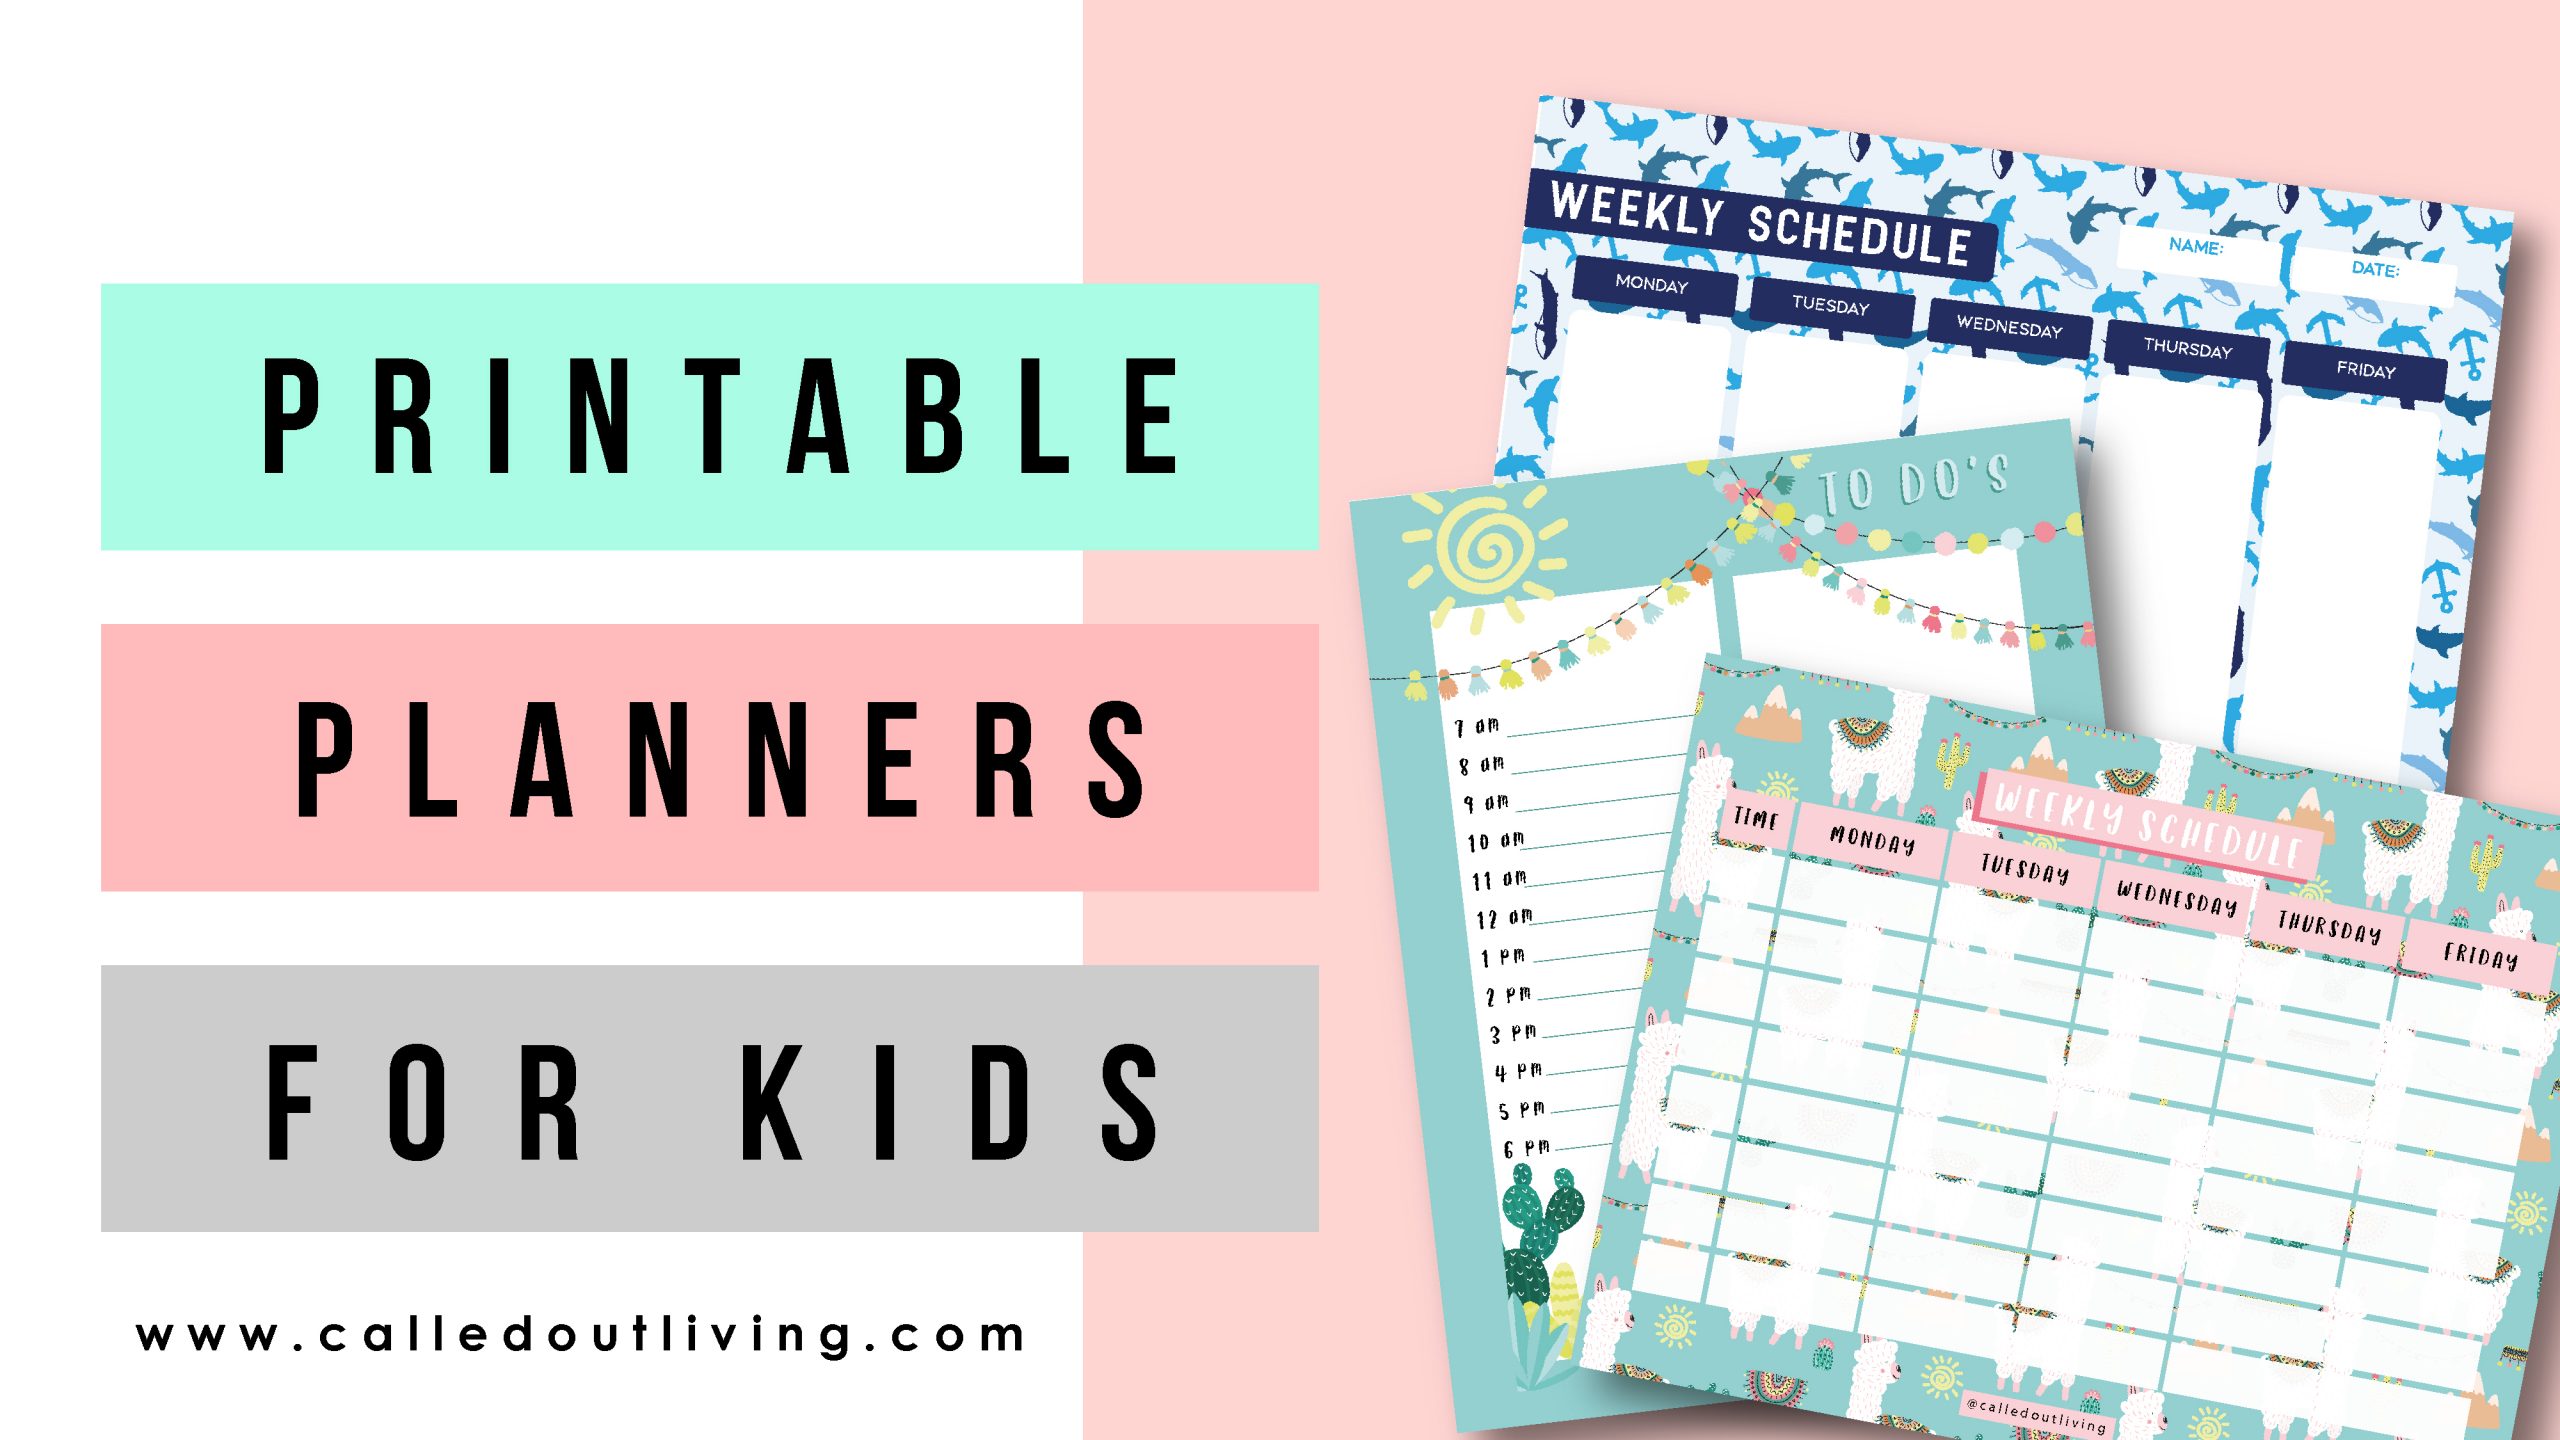 Printables for kids and families weekly planner daily planner - planners for home school - planners for homeschooling - weekly schedul - daily schedule - daily planners for kids - weekly planners for kids - printables for boys - printables for girls